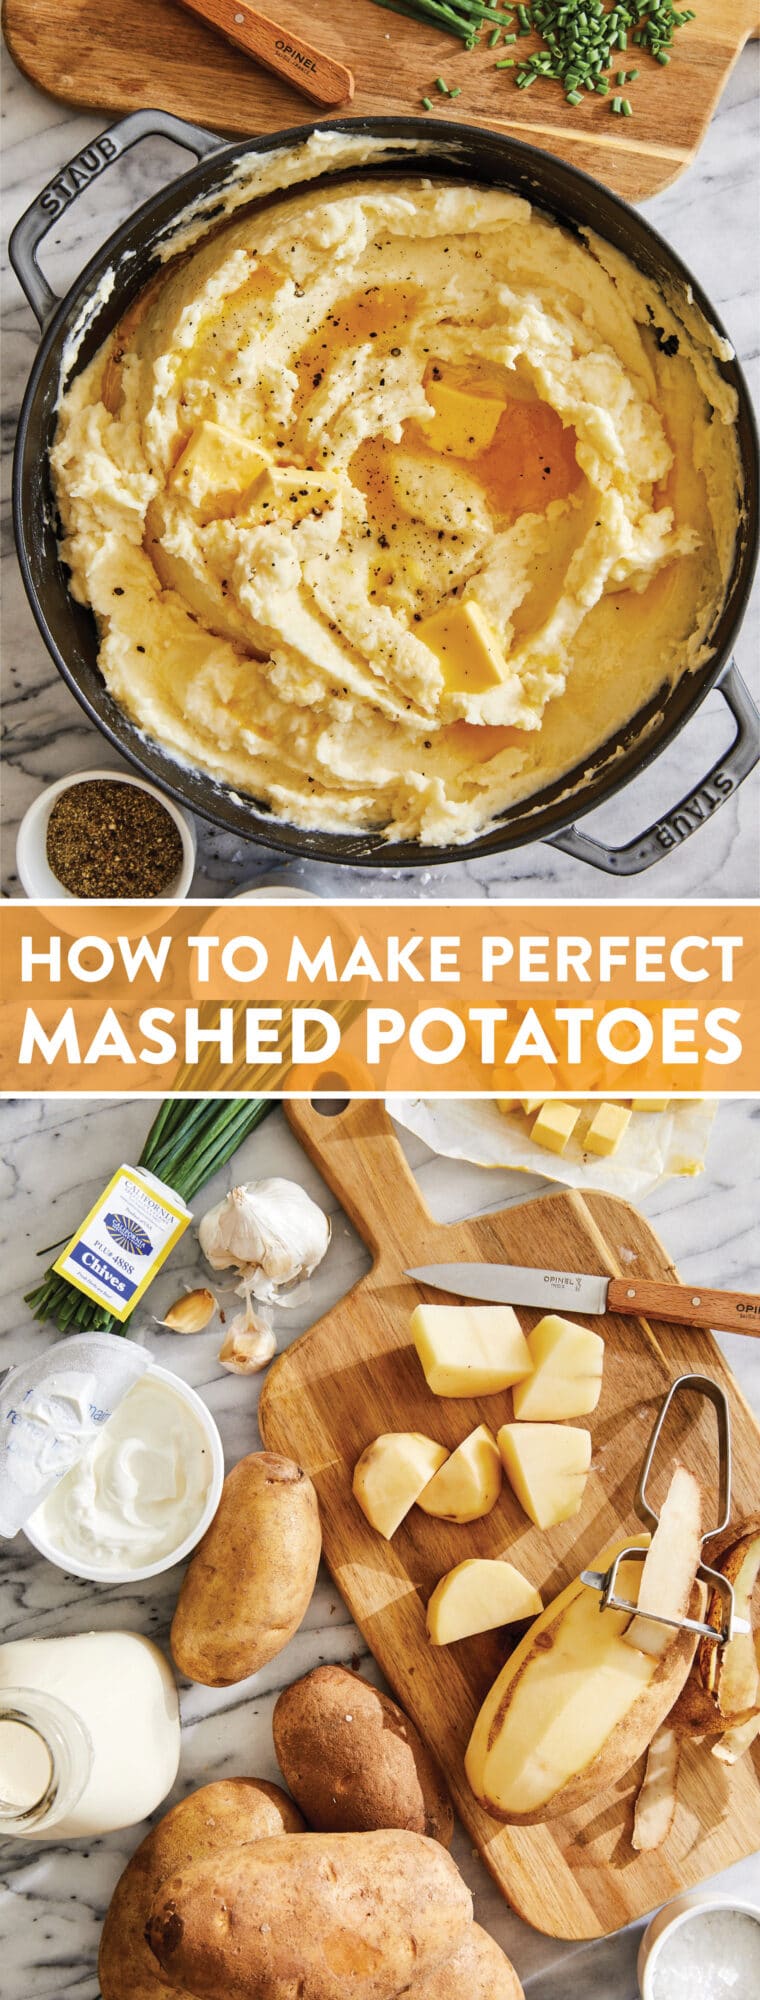 How to Make Perfect Mashed Potatoes - Make the best, most perfect (lump-free) mashed potatoes EVERY SINGLE TIME! So buttery, creamy + fluffy!